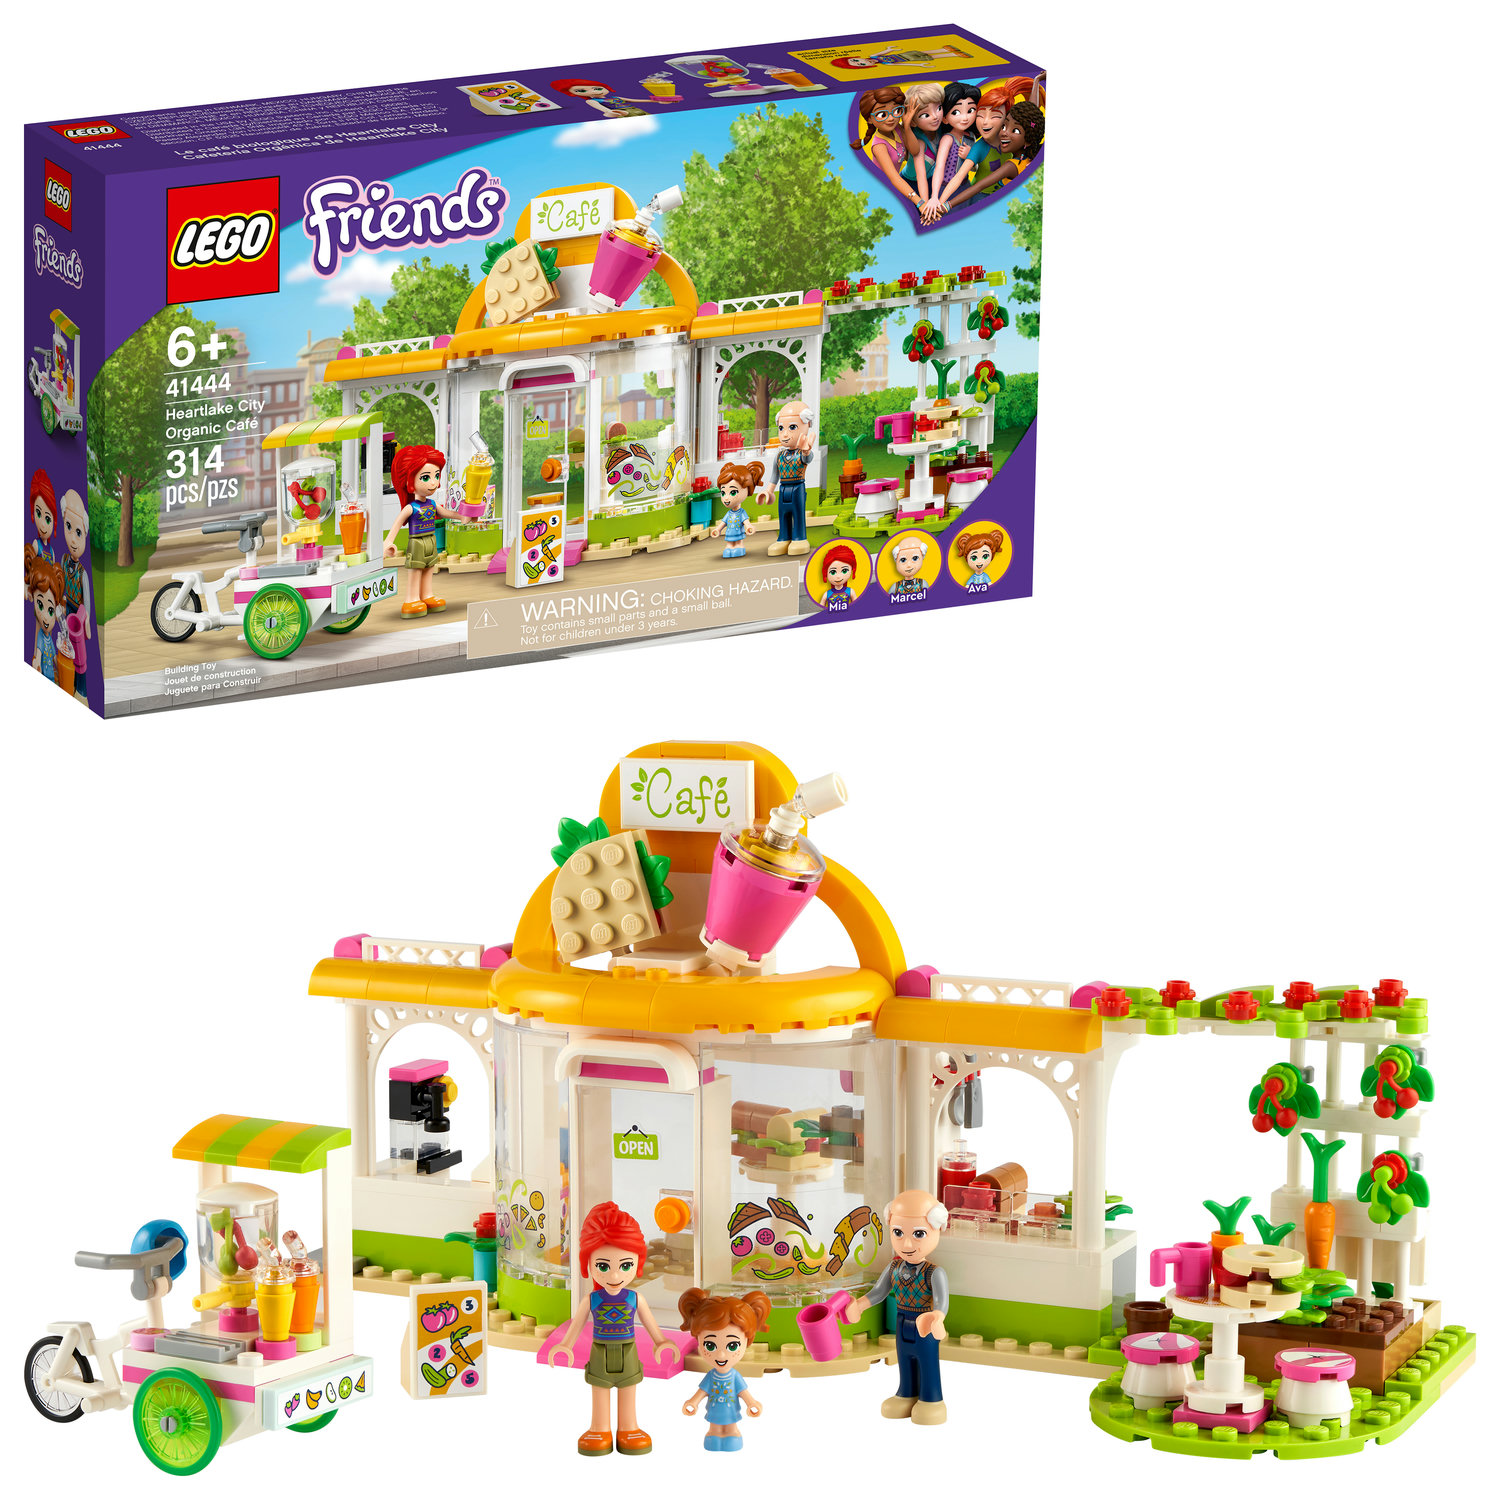 LEGO Friends Heartlake City Organic Café 41444 Building Toy; Comes with LEGO Friends Mia (314 Pieces) - image 1 of 10